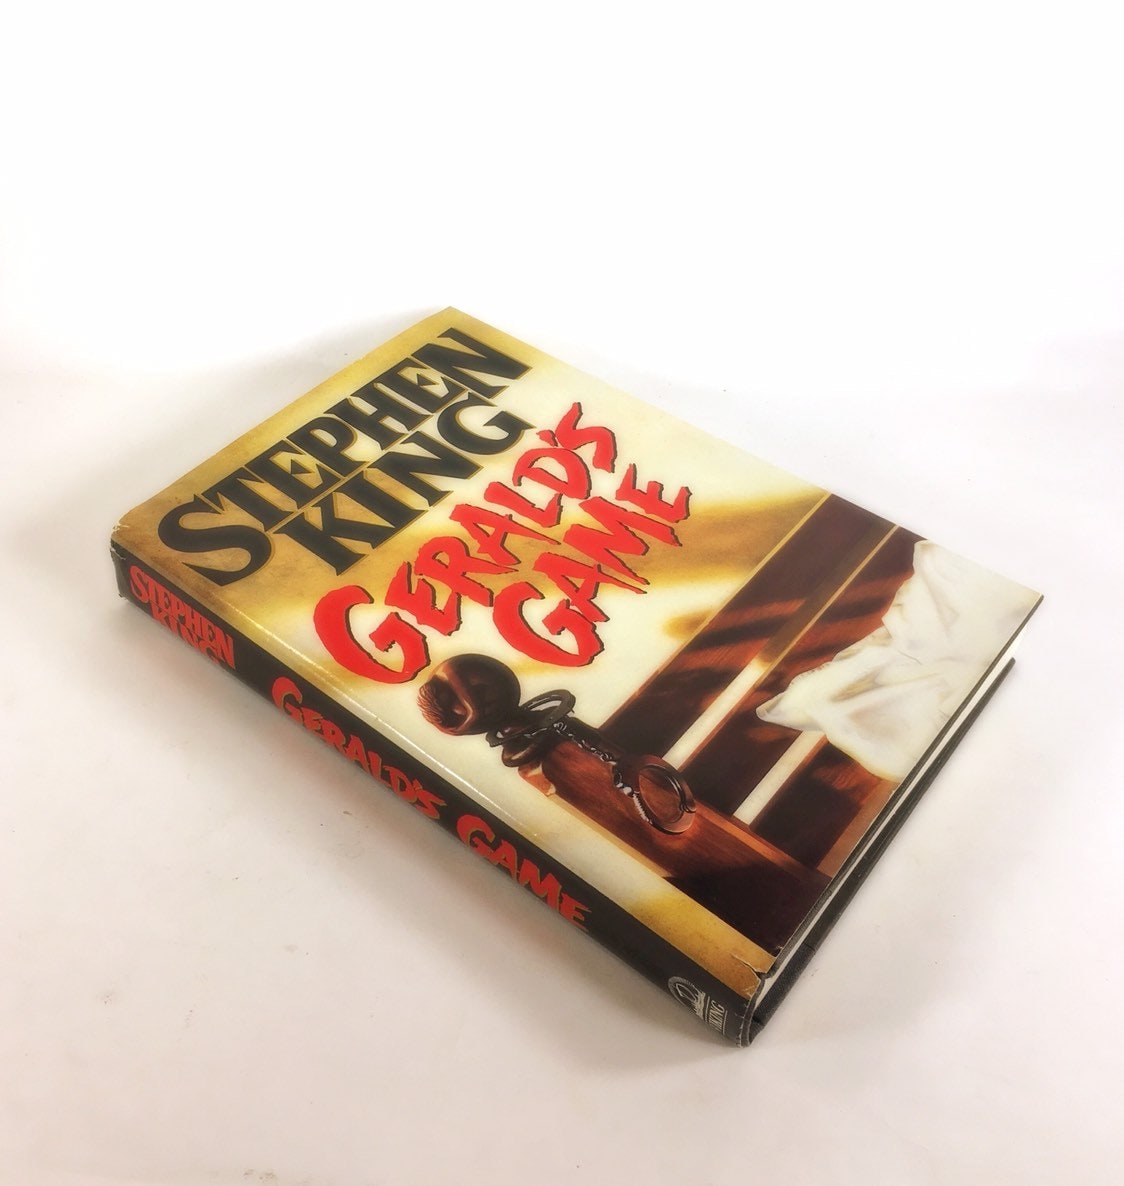 Gerald's Game by Stephen King FIRST EDITION First Printing vintage book circa 1992 with dust jacket. Collector gift decor